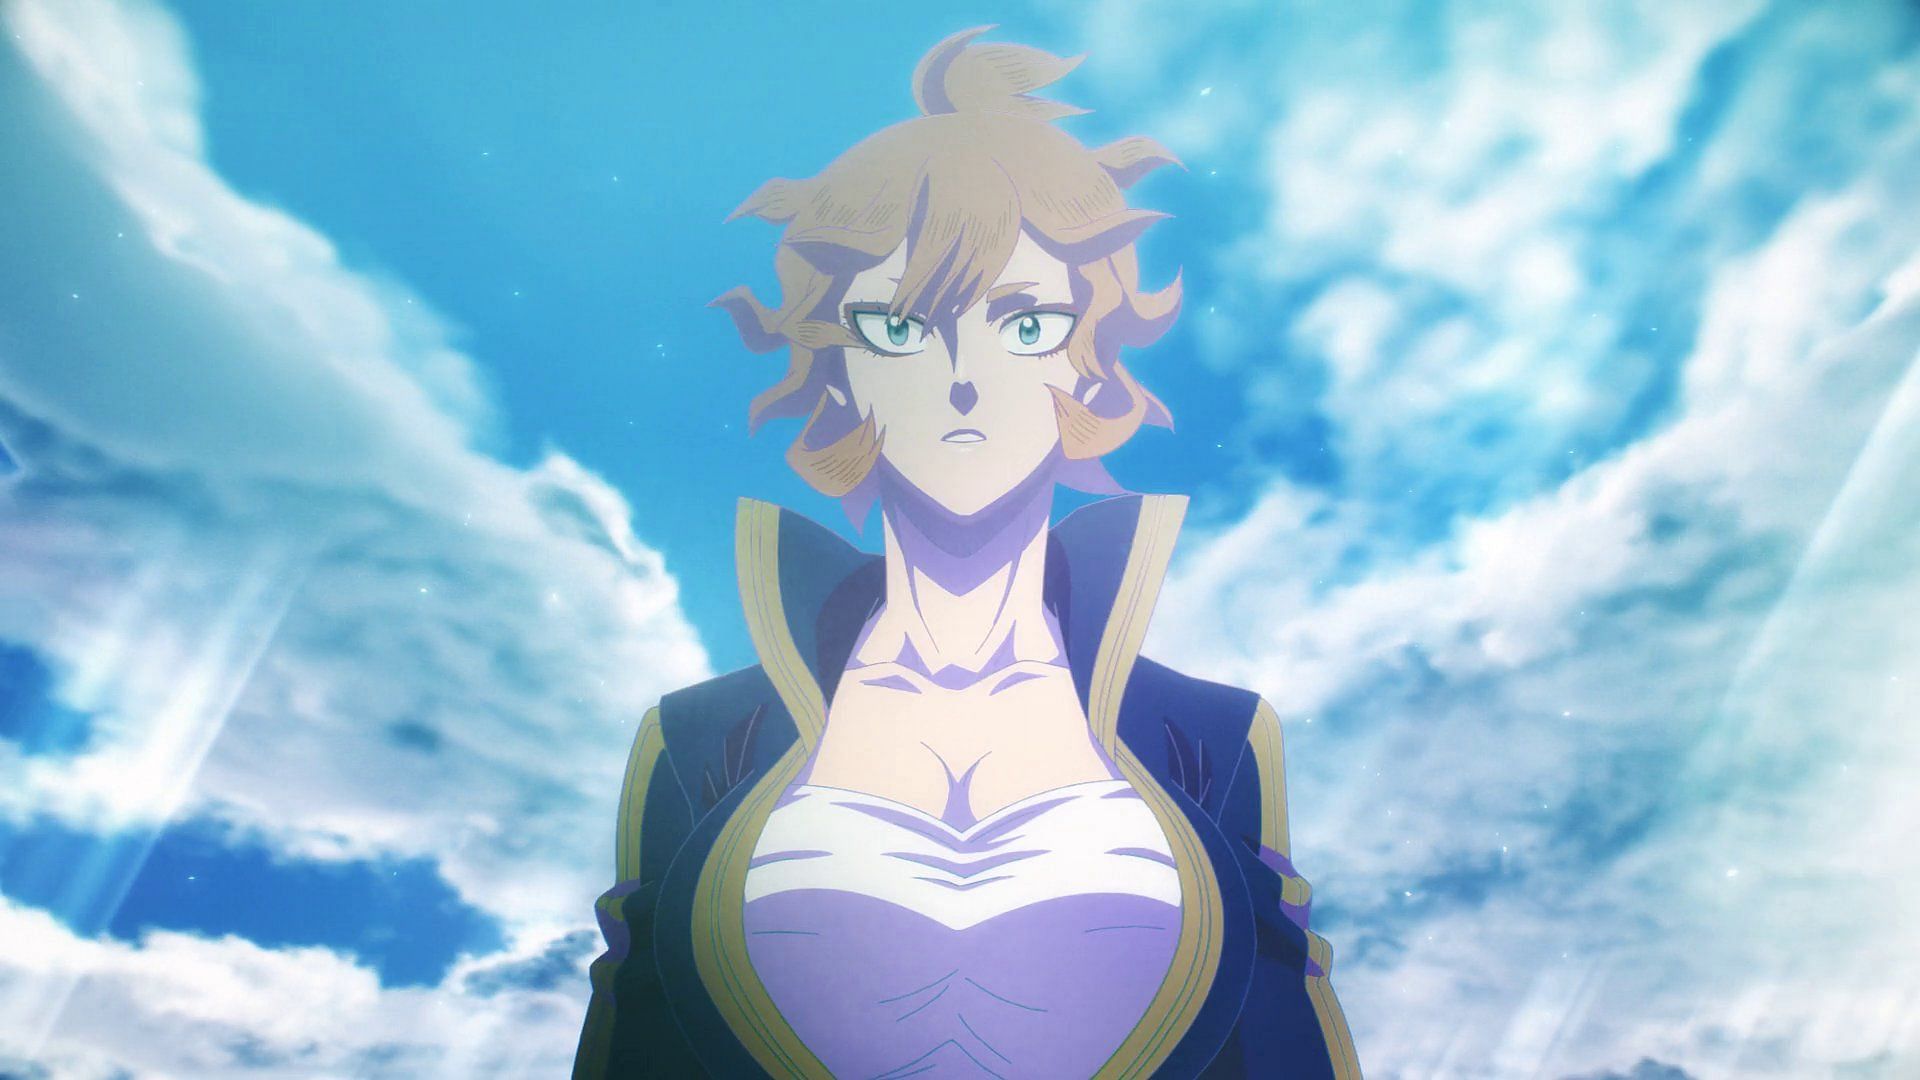 Black Clover chapter 371 spoilers: Mereoleona surpasses human limits as her fight with Morris ends (Image via Pierrot)